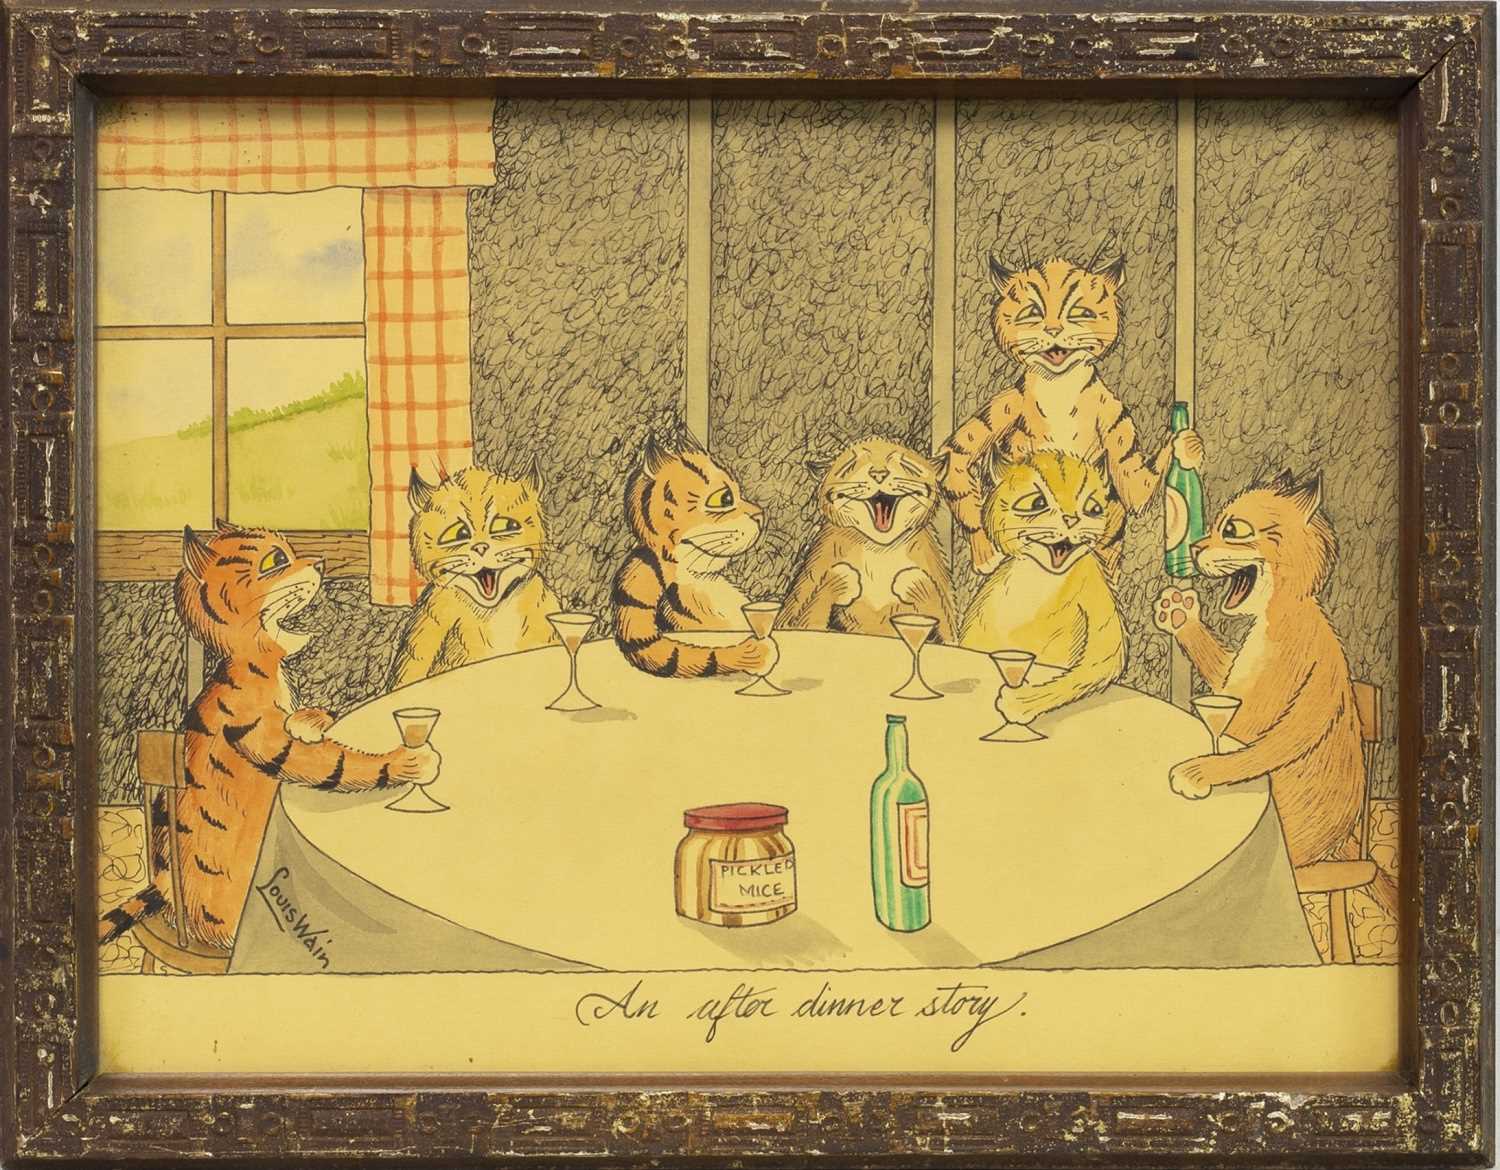 Lot 20 - AN AFTER DINNER STORY, A WATERCOLOUR BY LOUIS WAIN